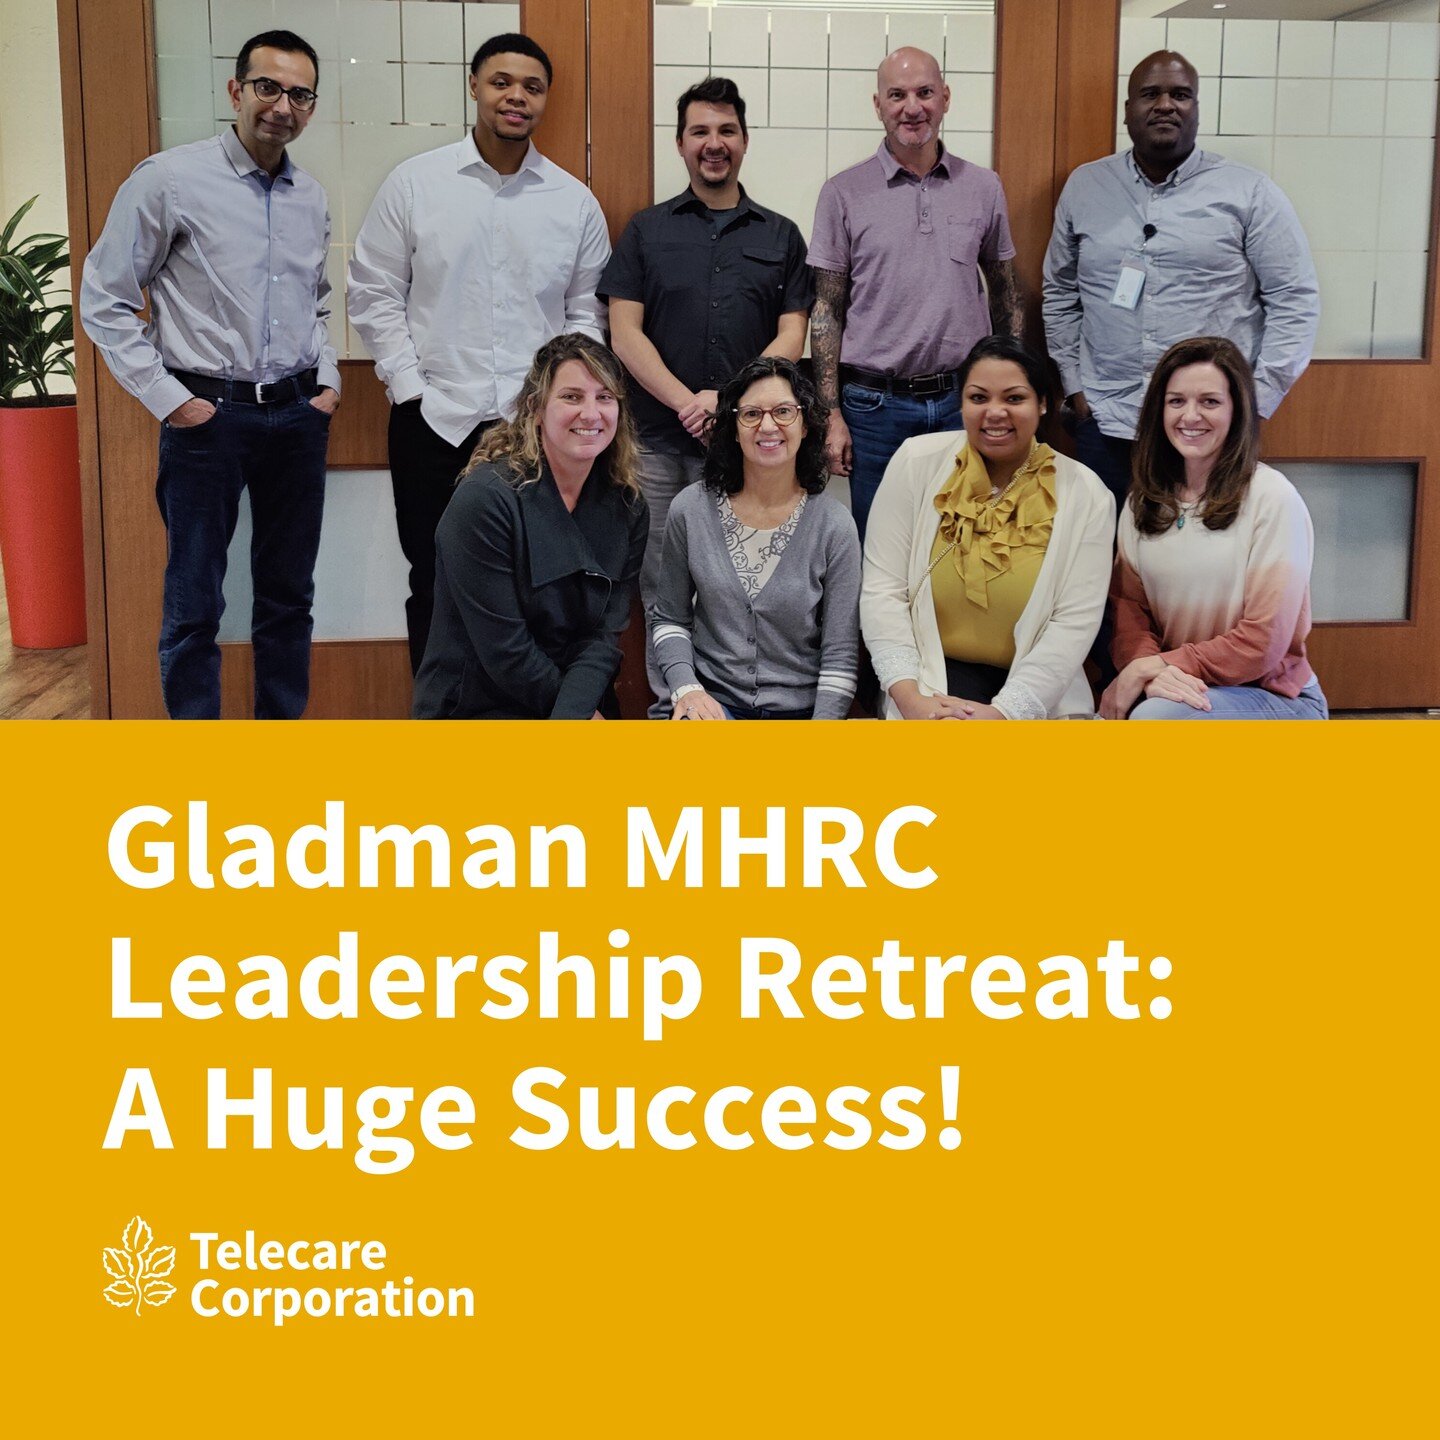 To work well together, we have to get to know each other. 

Telecare's Gladman Mental Health Rehabilitation Center (MHRC) in Oakland, CA, recently held a leadership retreat aimed at doing just that. 

Staff walked away from the retreat with greater k